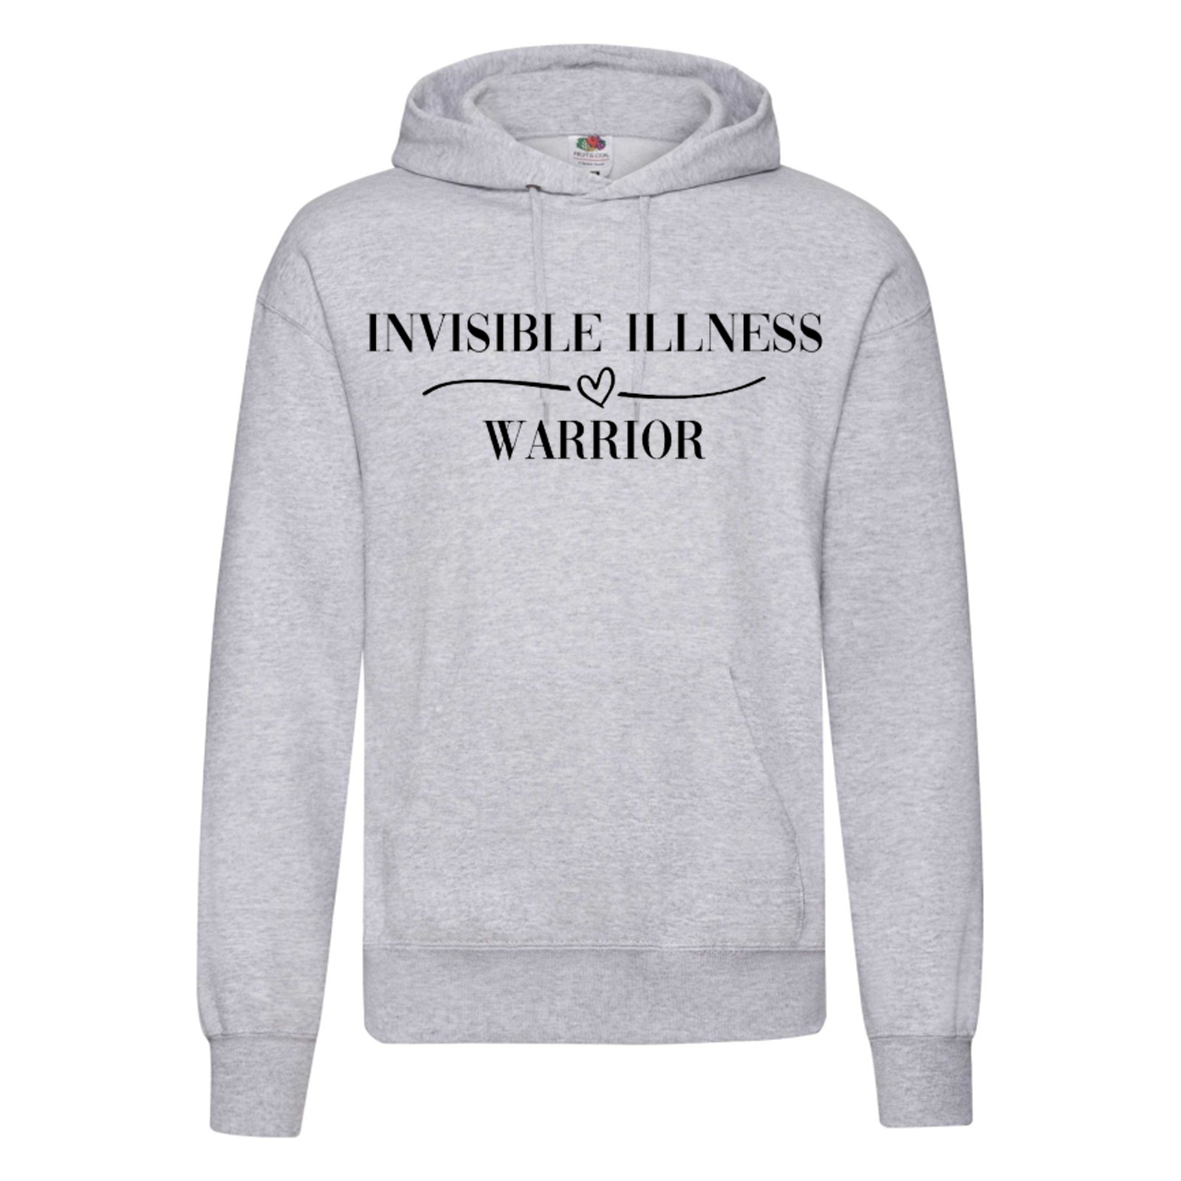 Invisible Illness Warrior Hoodie